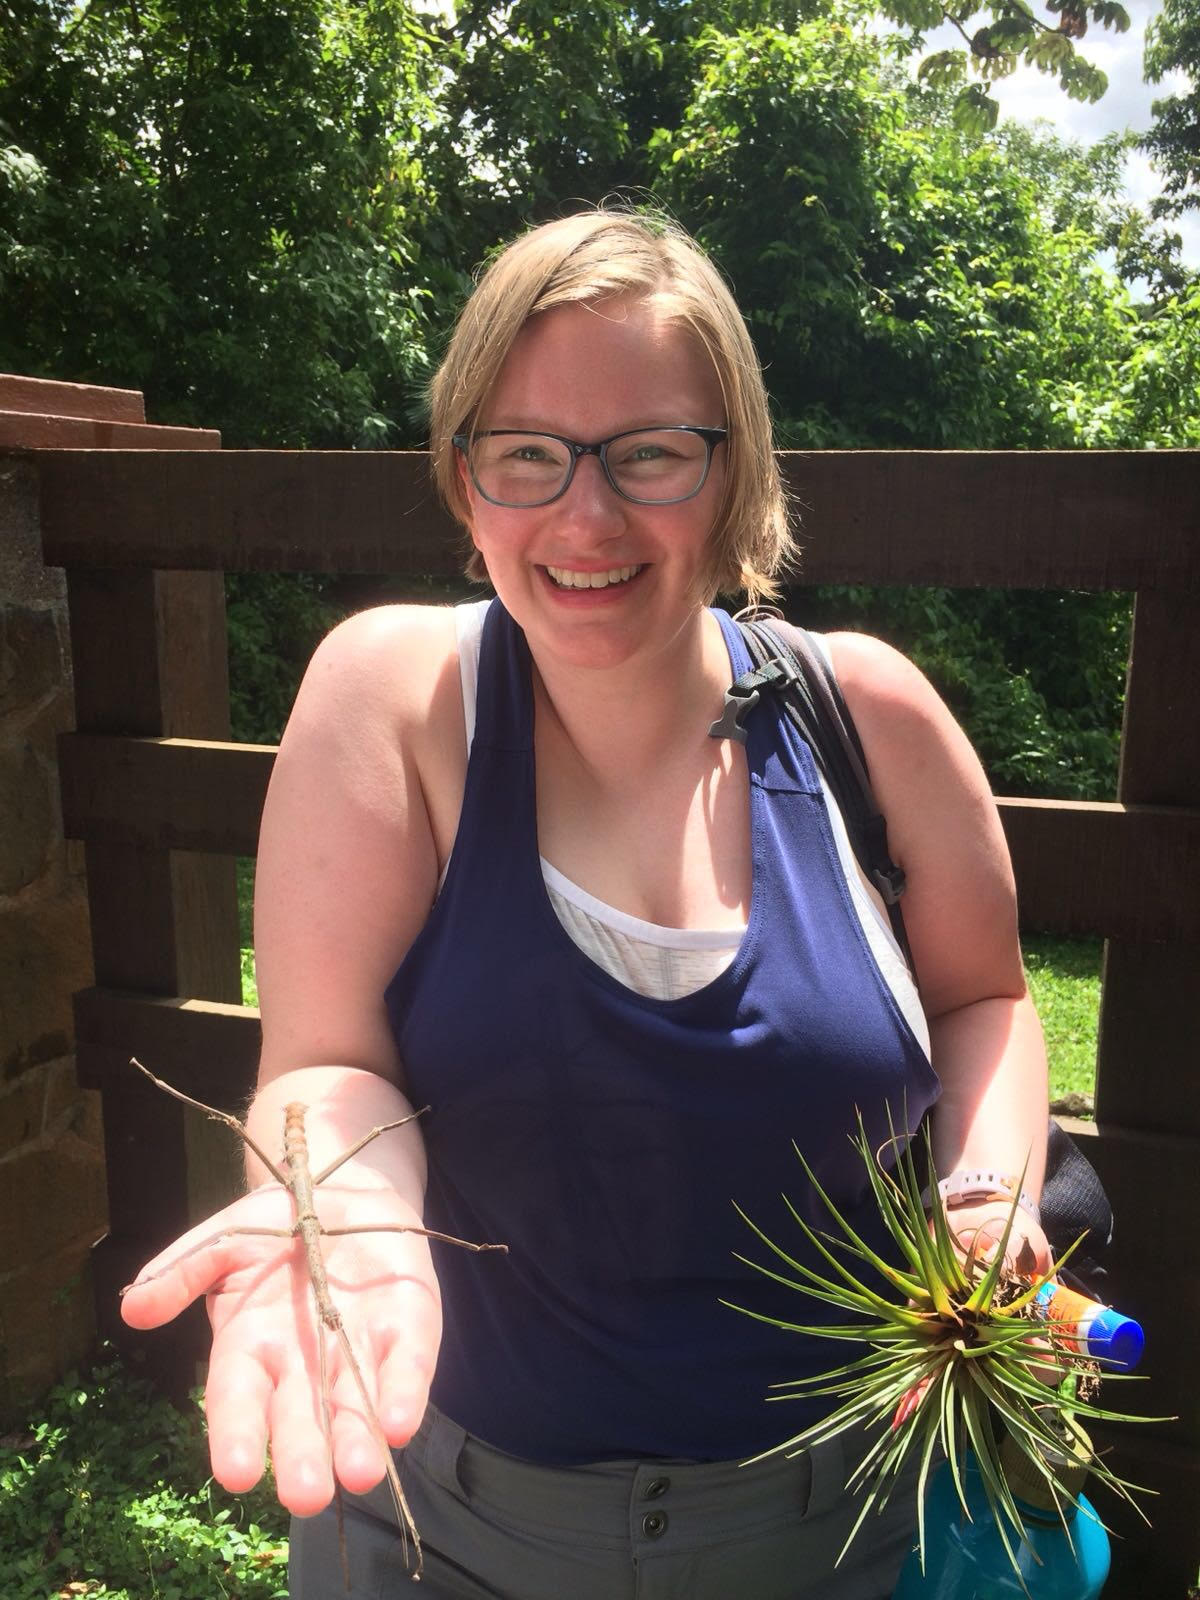 Hannah Hess, 2018-19 EAO Peer Mentor, blonde haired female wearing round blue glasses and a blue tank top holding a walking stick bug in her right hand and grass and an orange sunscreen bottle in her left hand, standing in front of a wooden fence on a lawn in front of trees in the background.